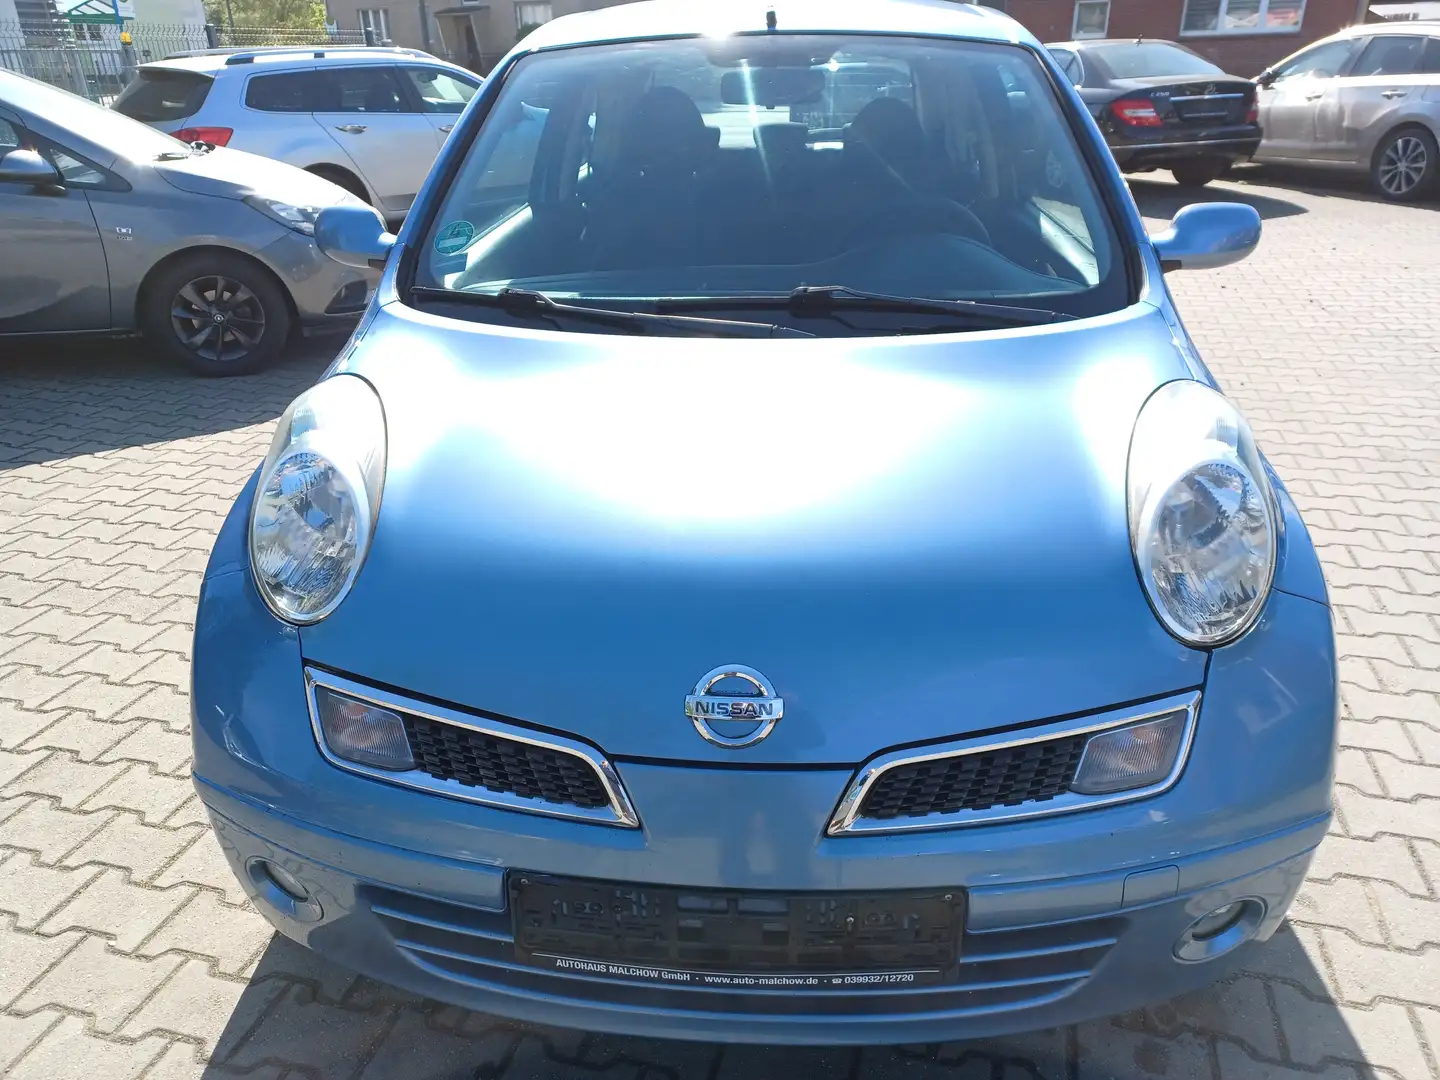 Nissan Micra More Blue - 2